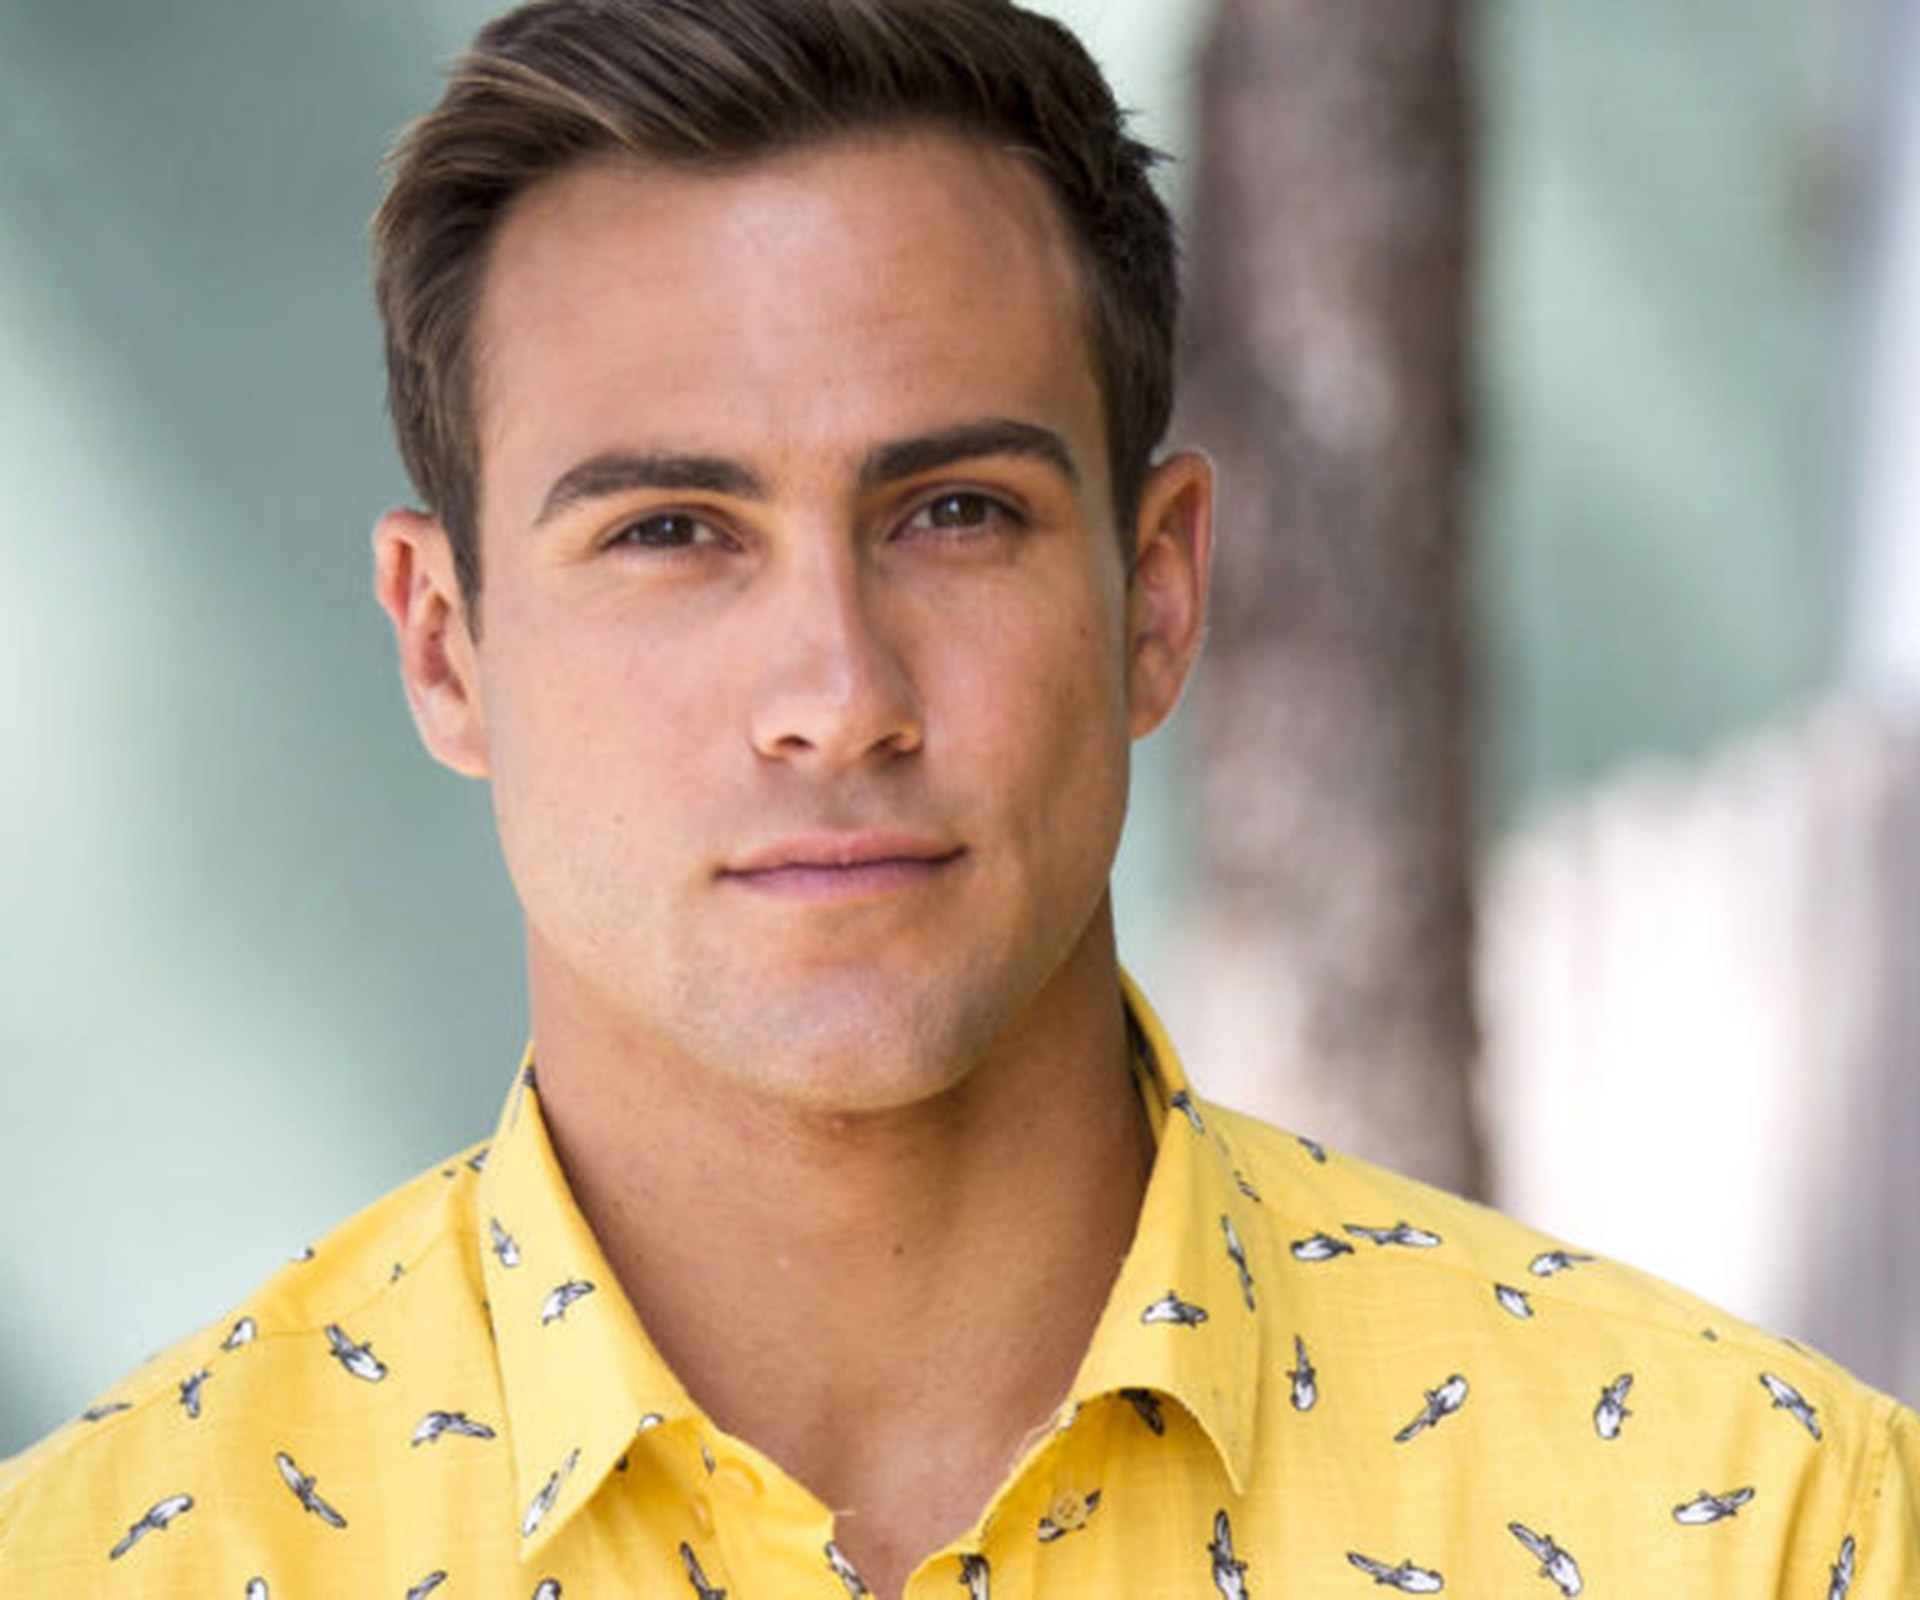 Neighbours star Matt Wilson’s comments about playing gay character have caused uproar